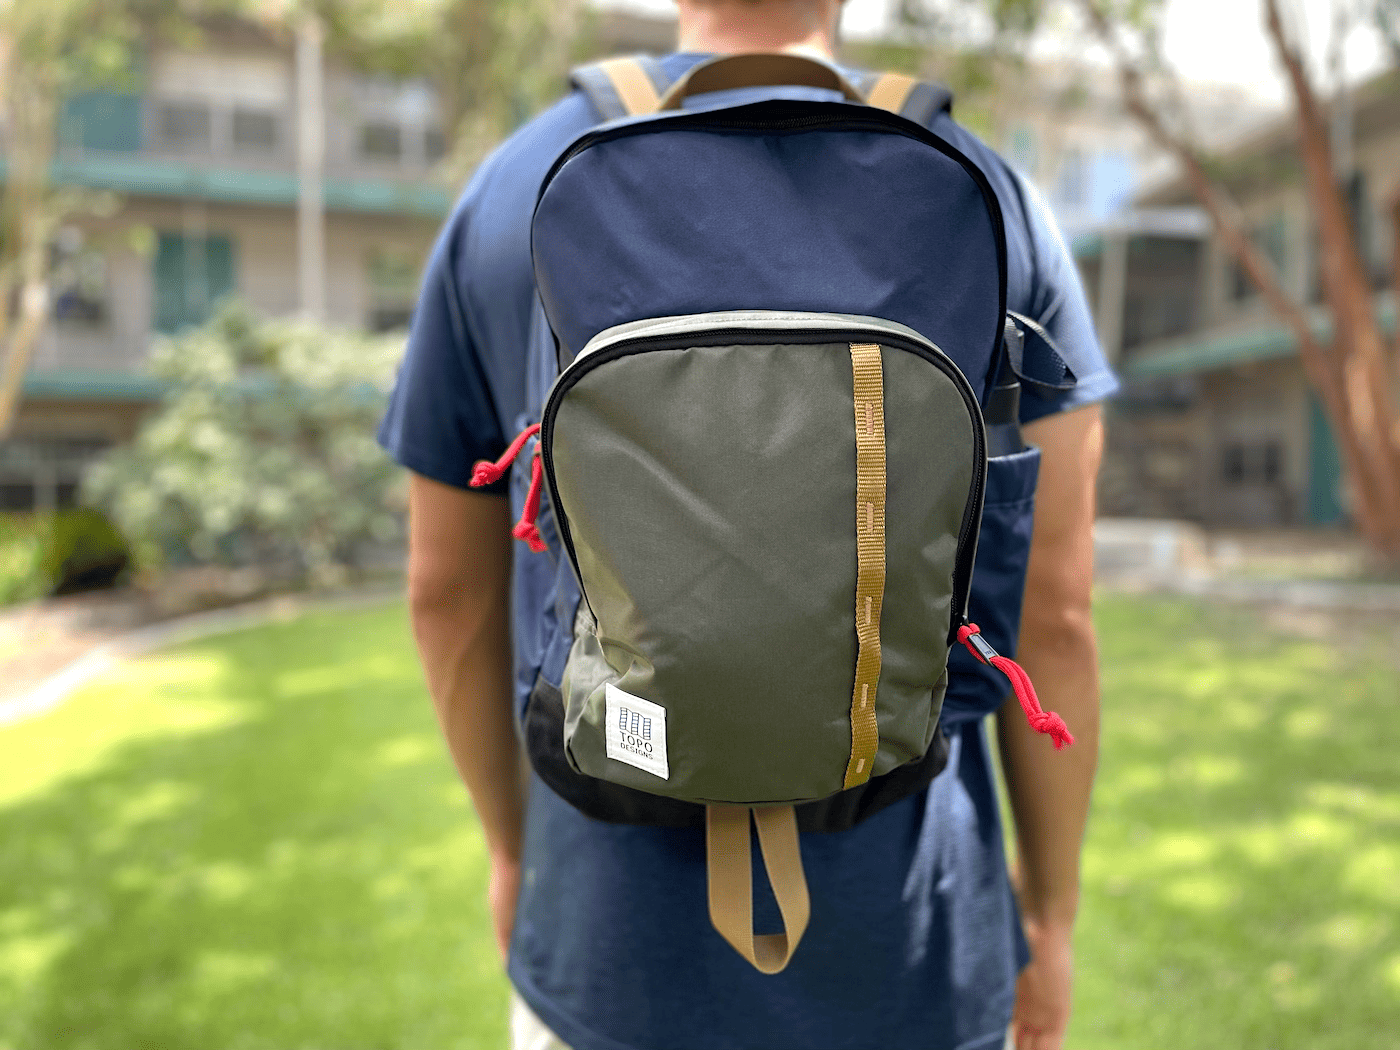 Wearing the TOPO sessions backack